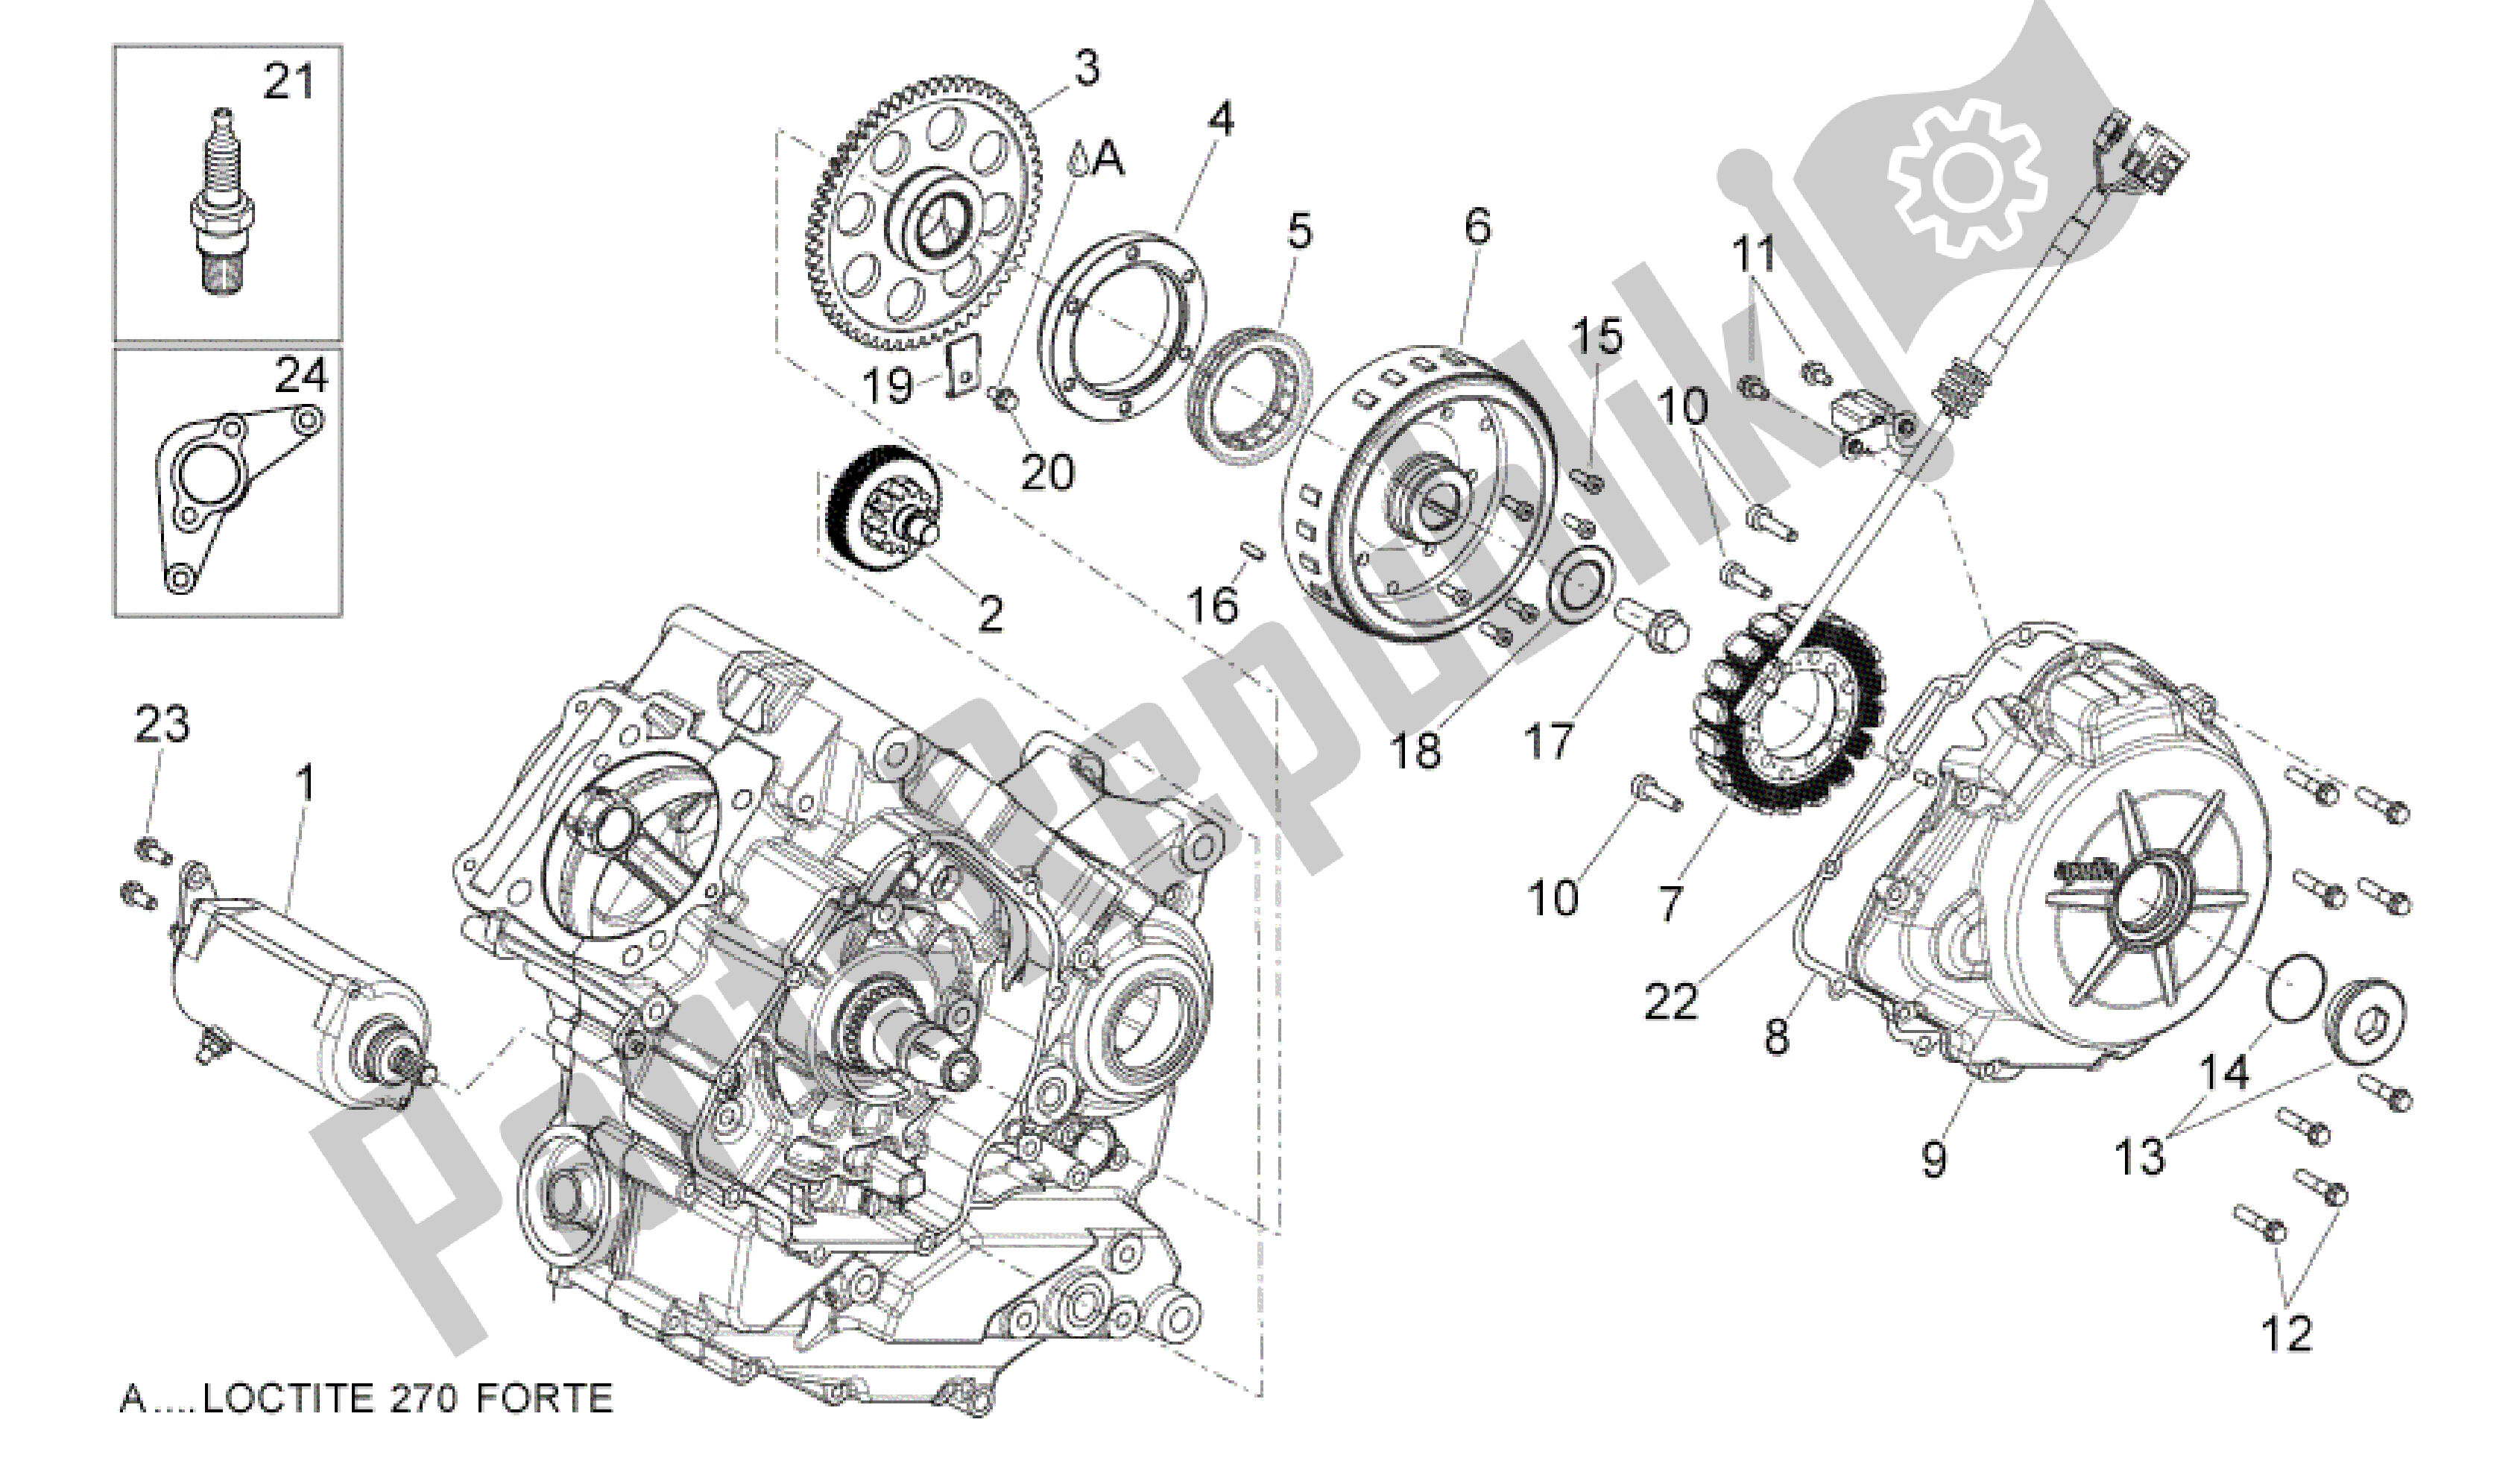 All parts for the Ignition Unit of the Aprilia Shiver 750 2007 - 2009